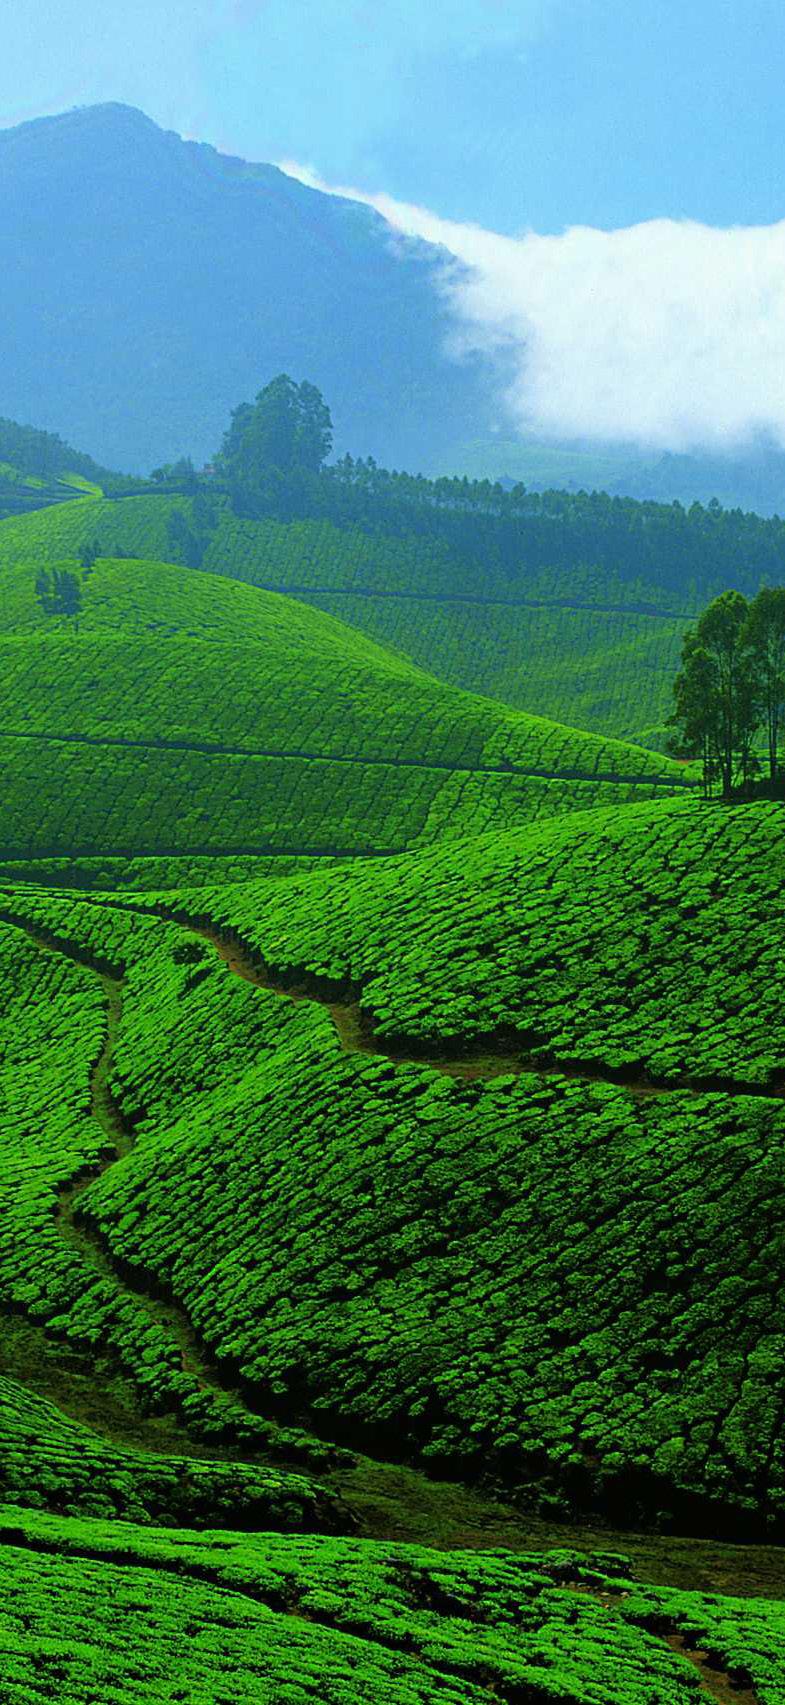 NEARBY PLACES OF ATTRACTION OOTY 80 KM Ooty is the Queen of hill stations located in the Nilgiri Hills. It is situated at an altitude of 2,240 m above sea level.